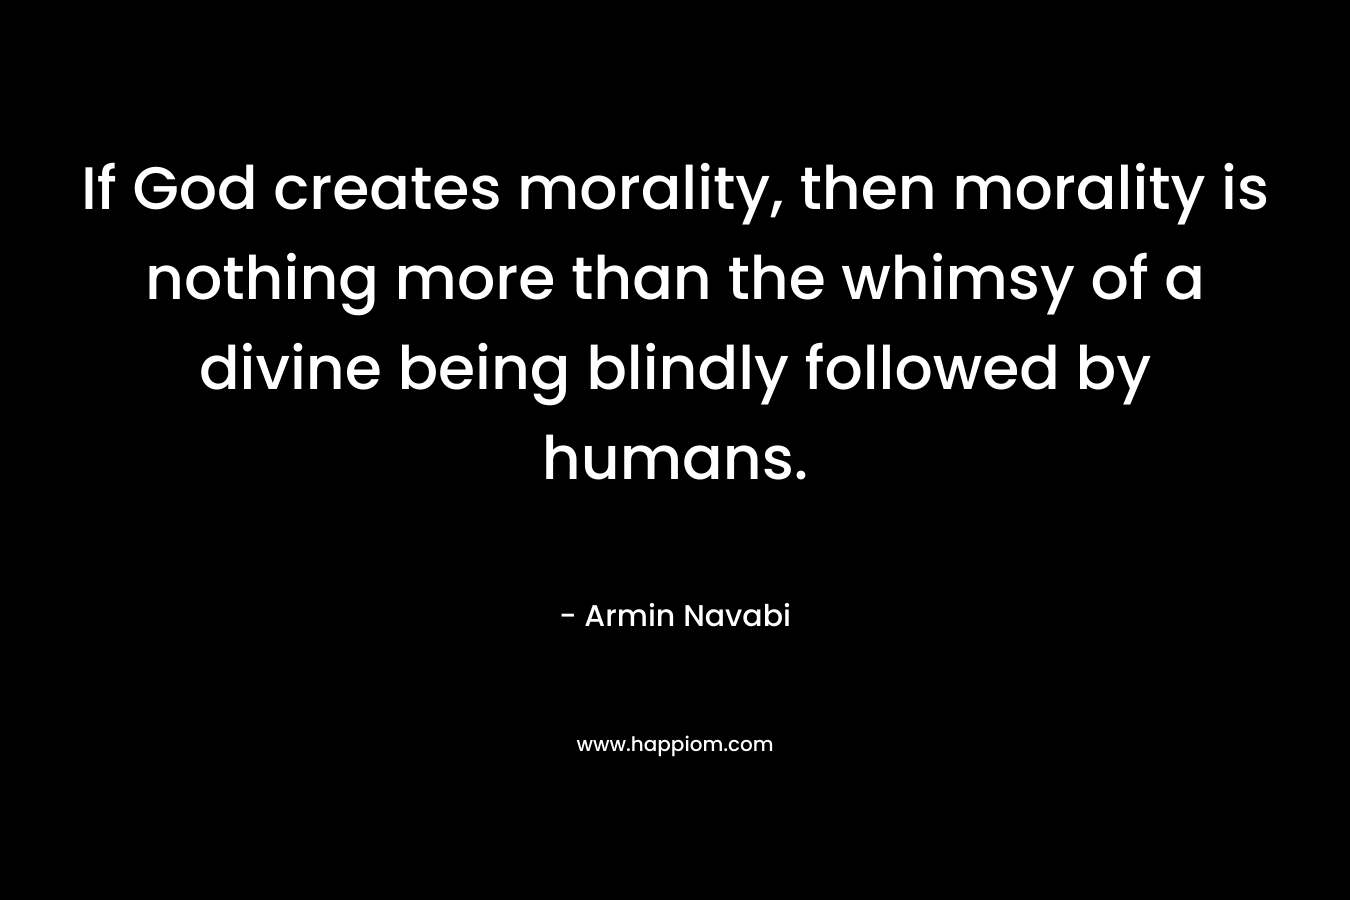 If God creates morality, then morality is nothing more than the whimsy of a divine being blindly followed by humans. – Armin Navabi